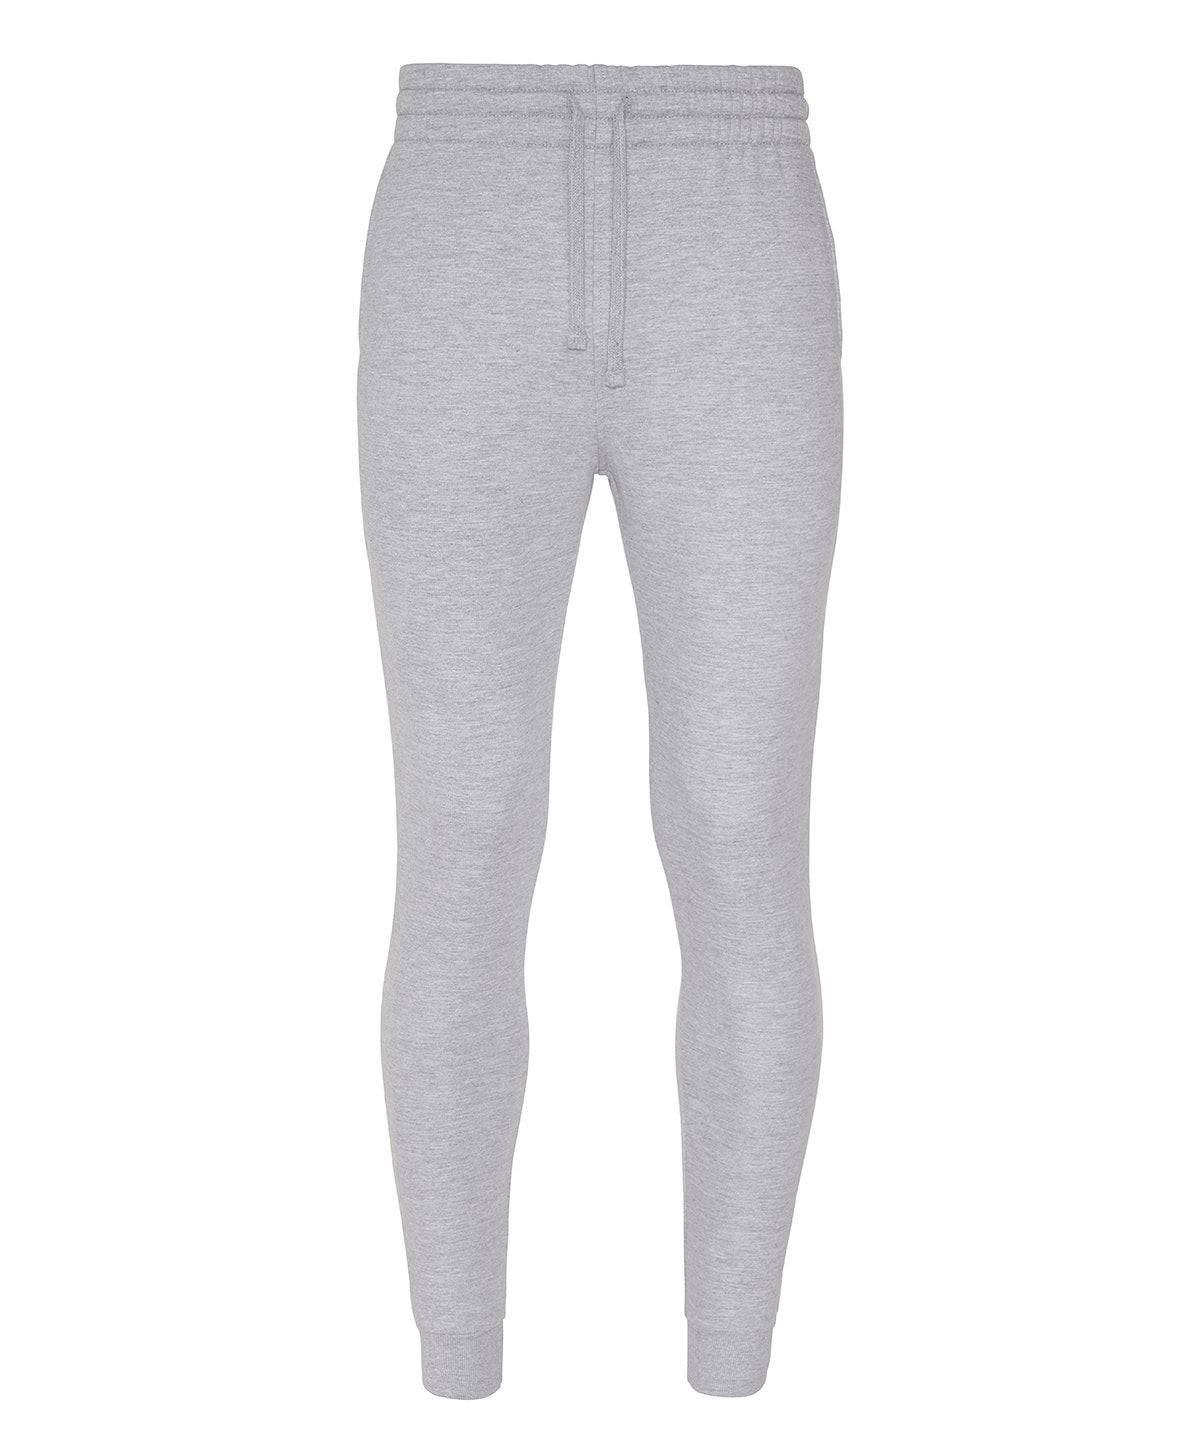 Heather Grey - Tapered track pants